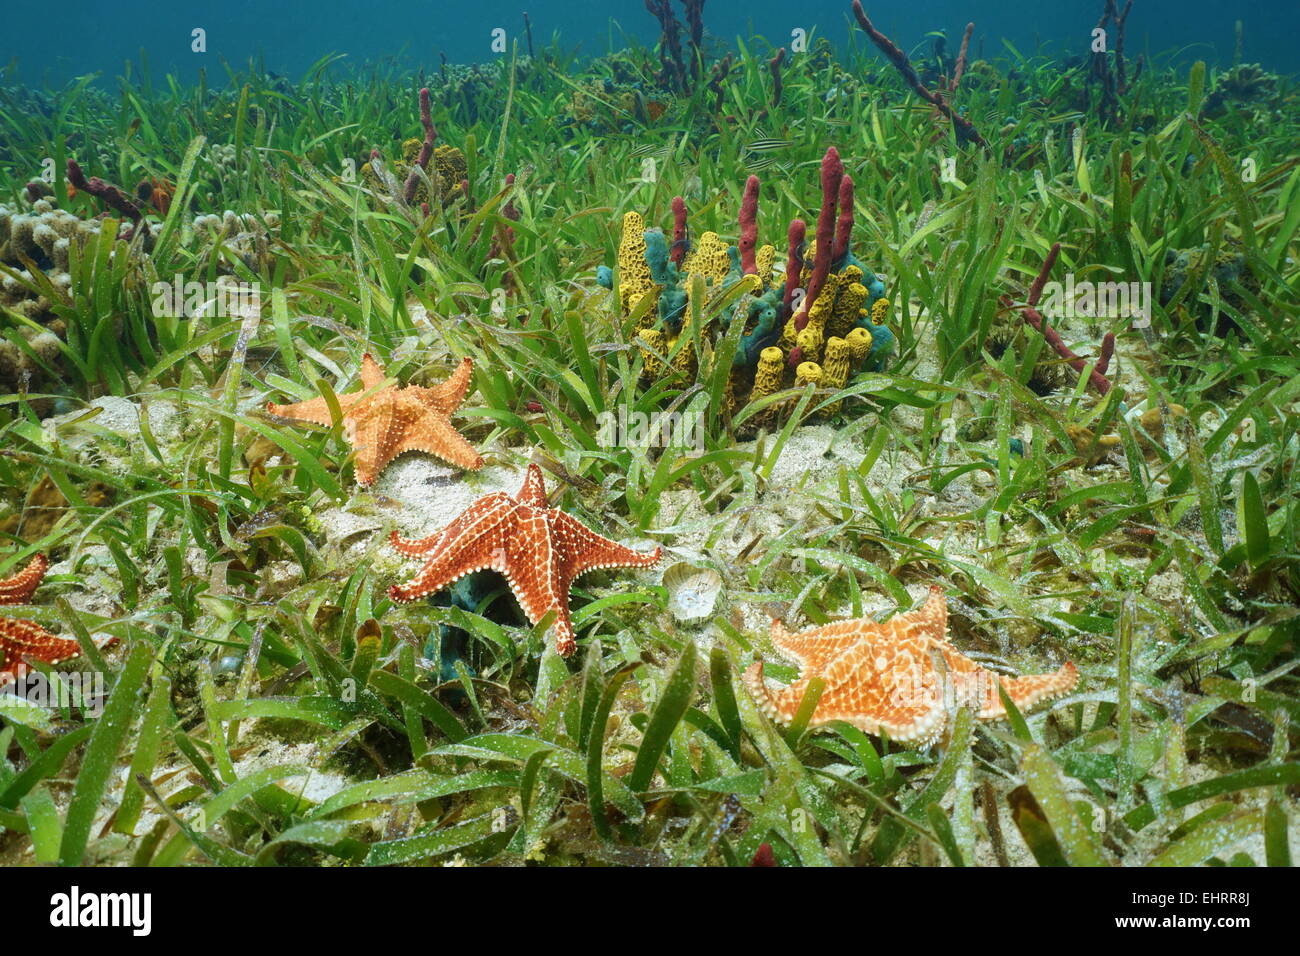 Cushion sea star undersea with colorful sponges on grassy seabed in the Caribbean sea Stock Photo